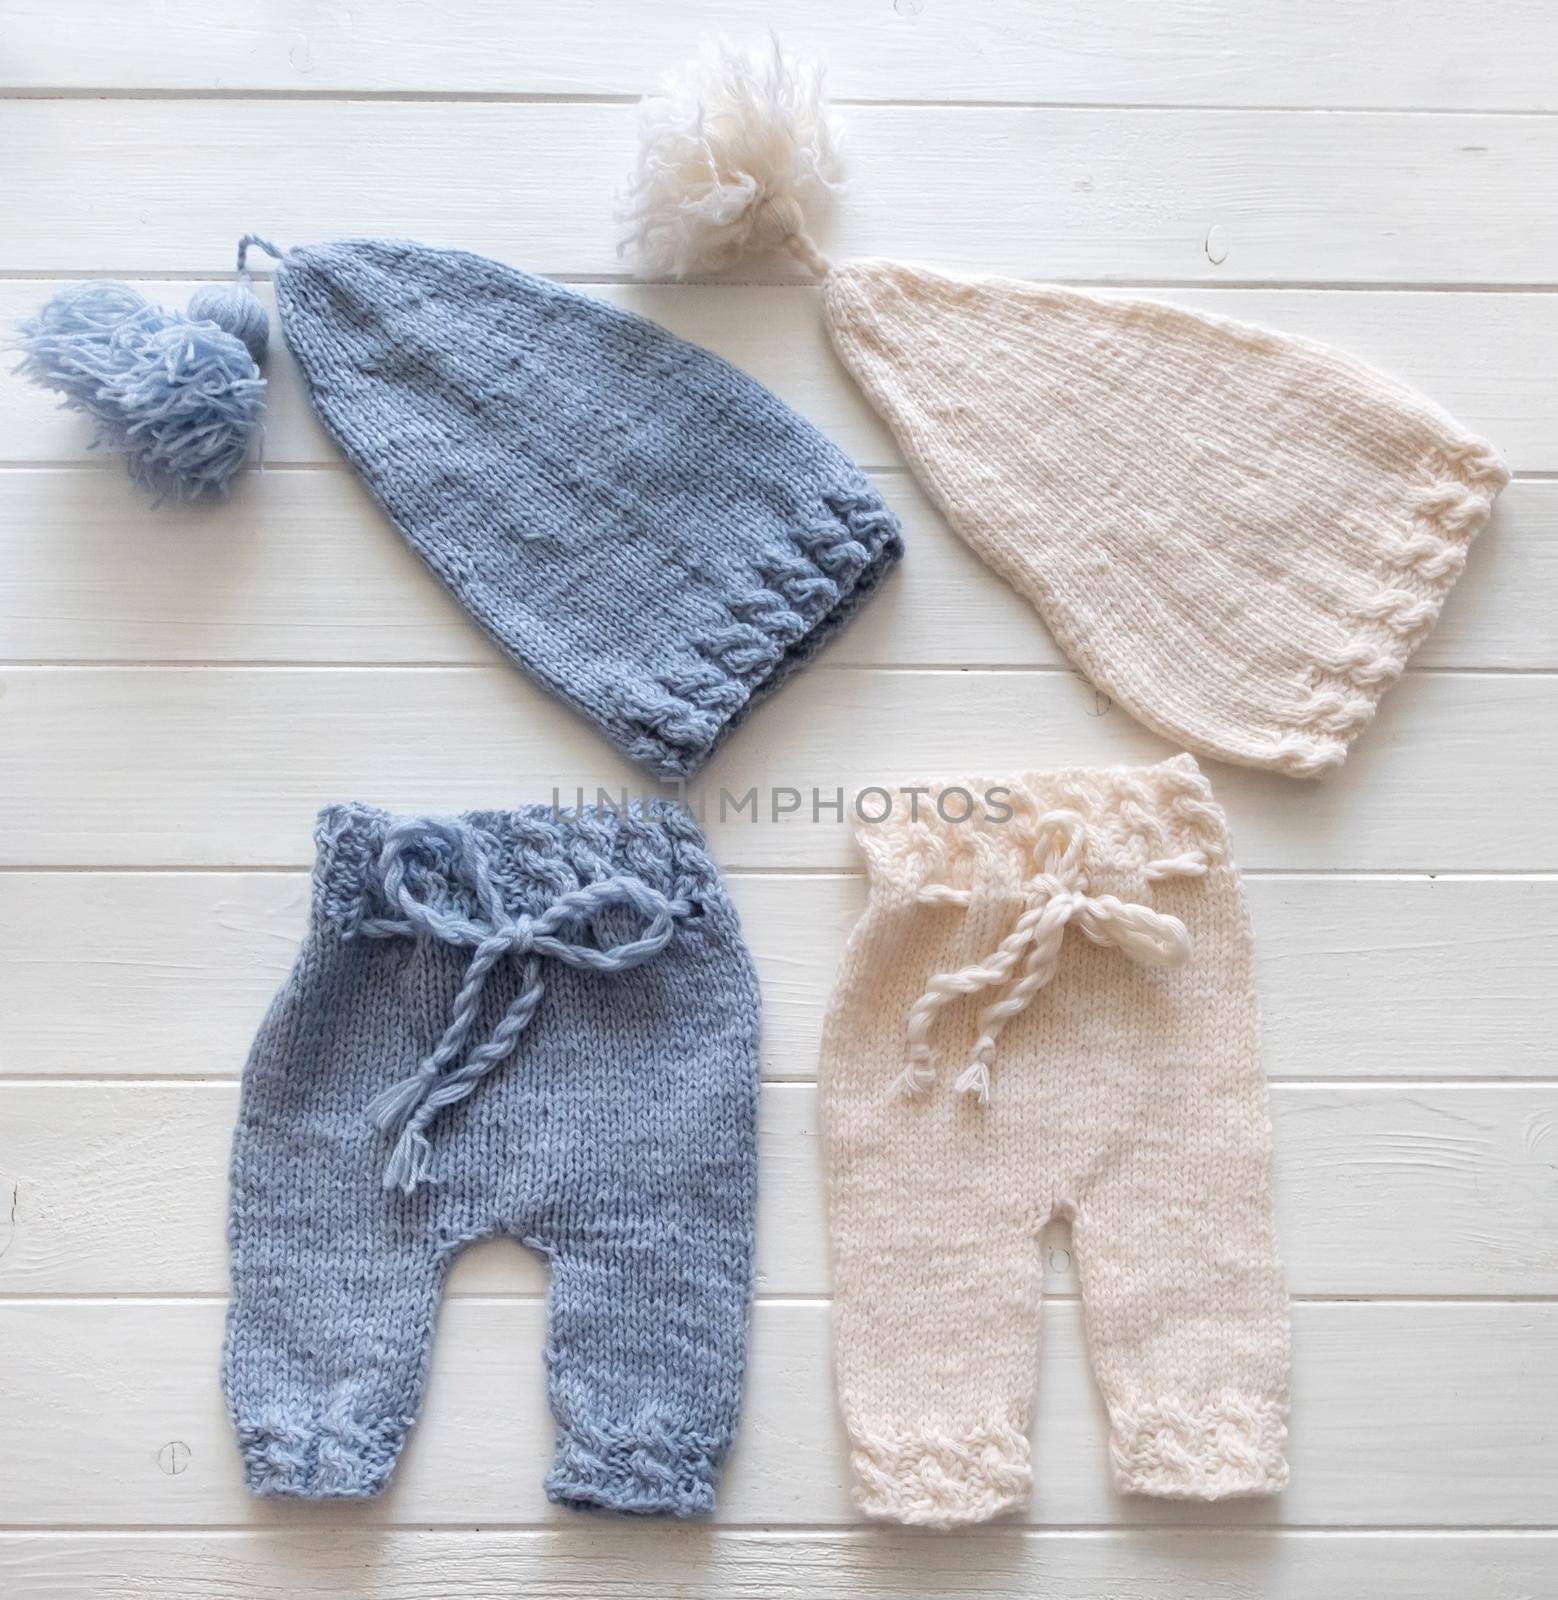 Cute blue and white knitted hats and pants for babies by tan4ikk1